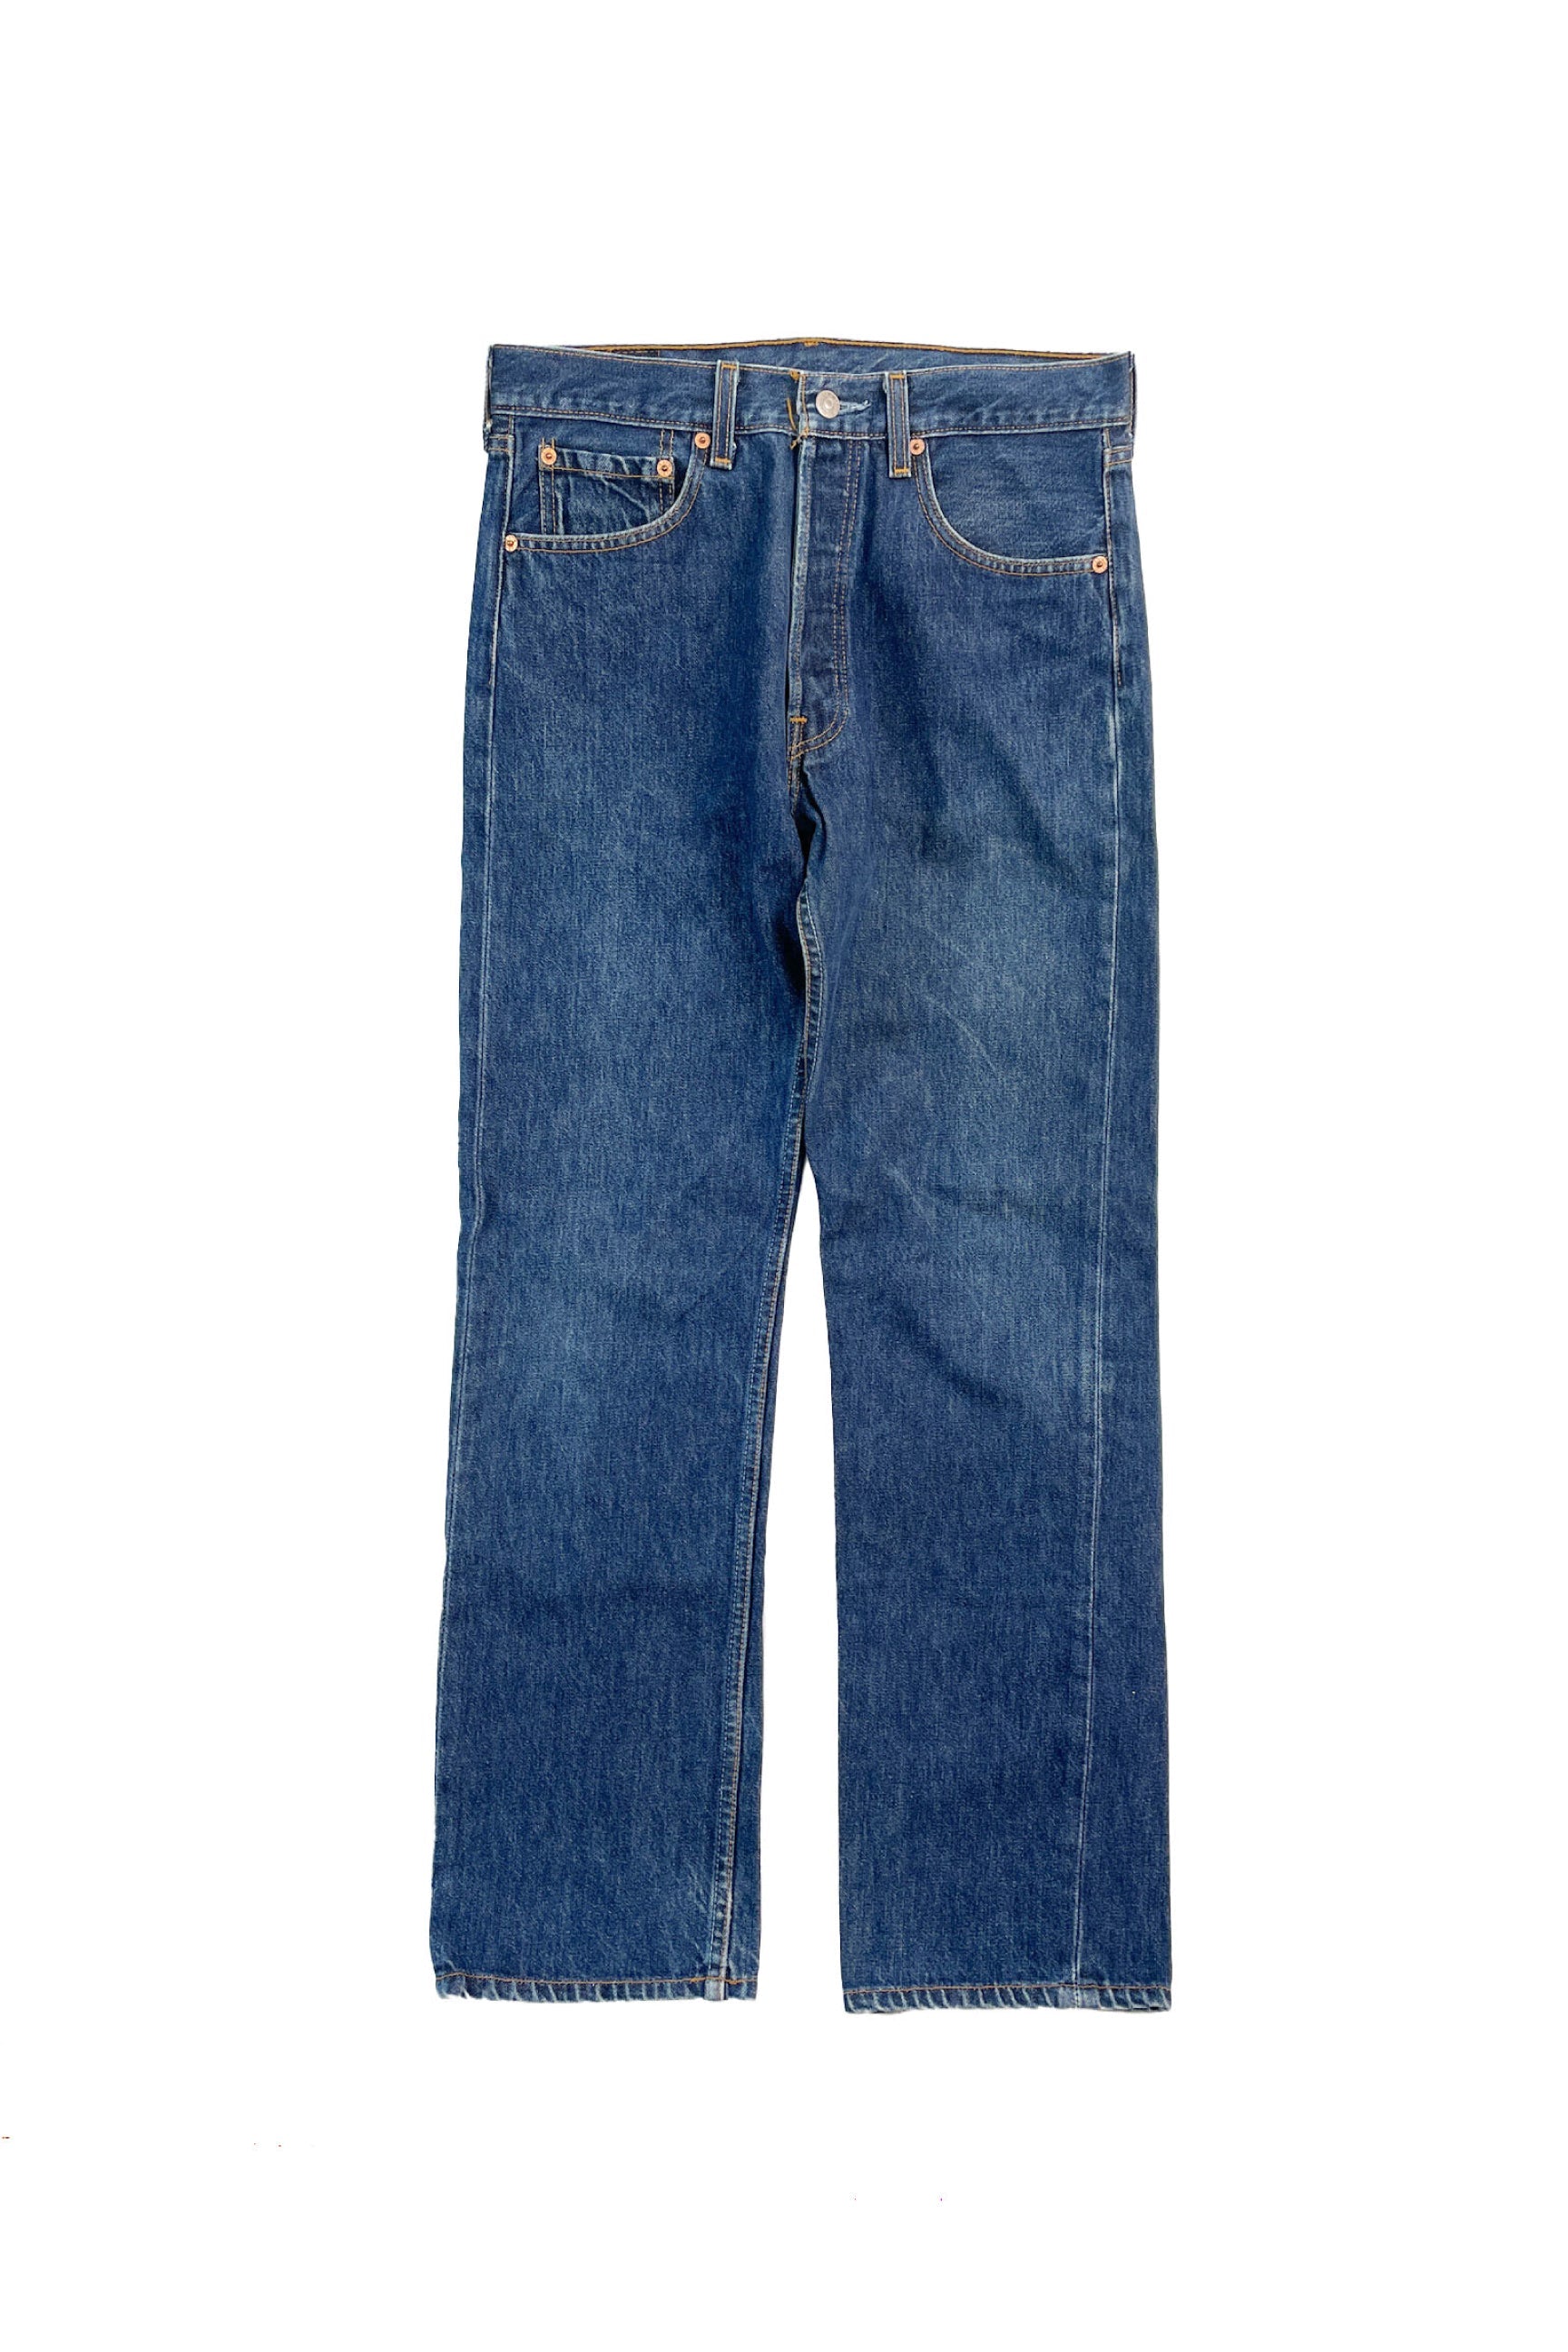 90's Made in USA Levi's 501xx denim pants – ReSCOUNT STORE